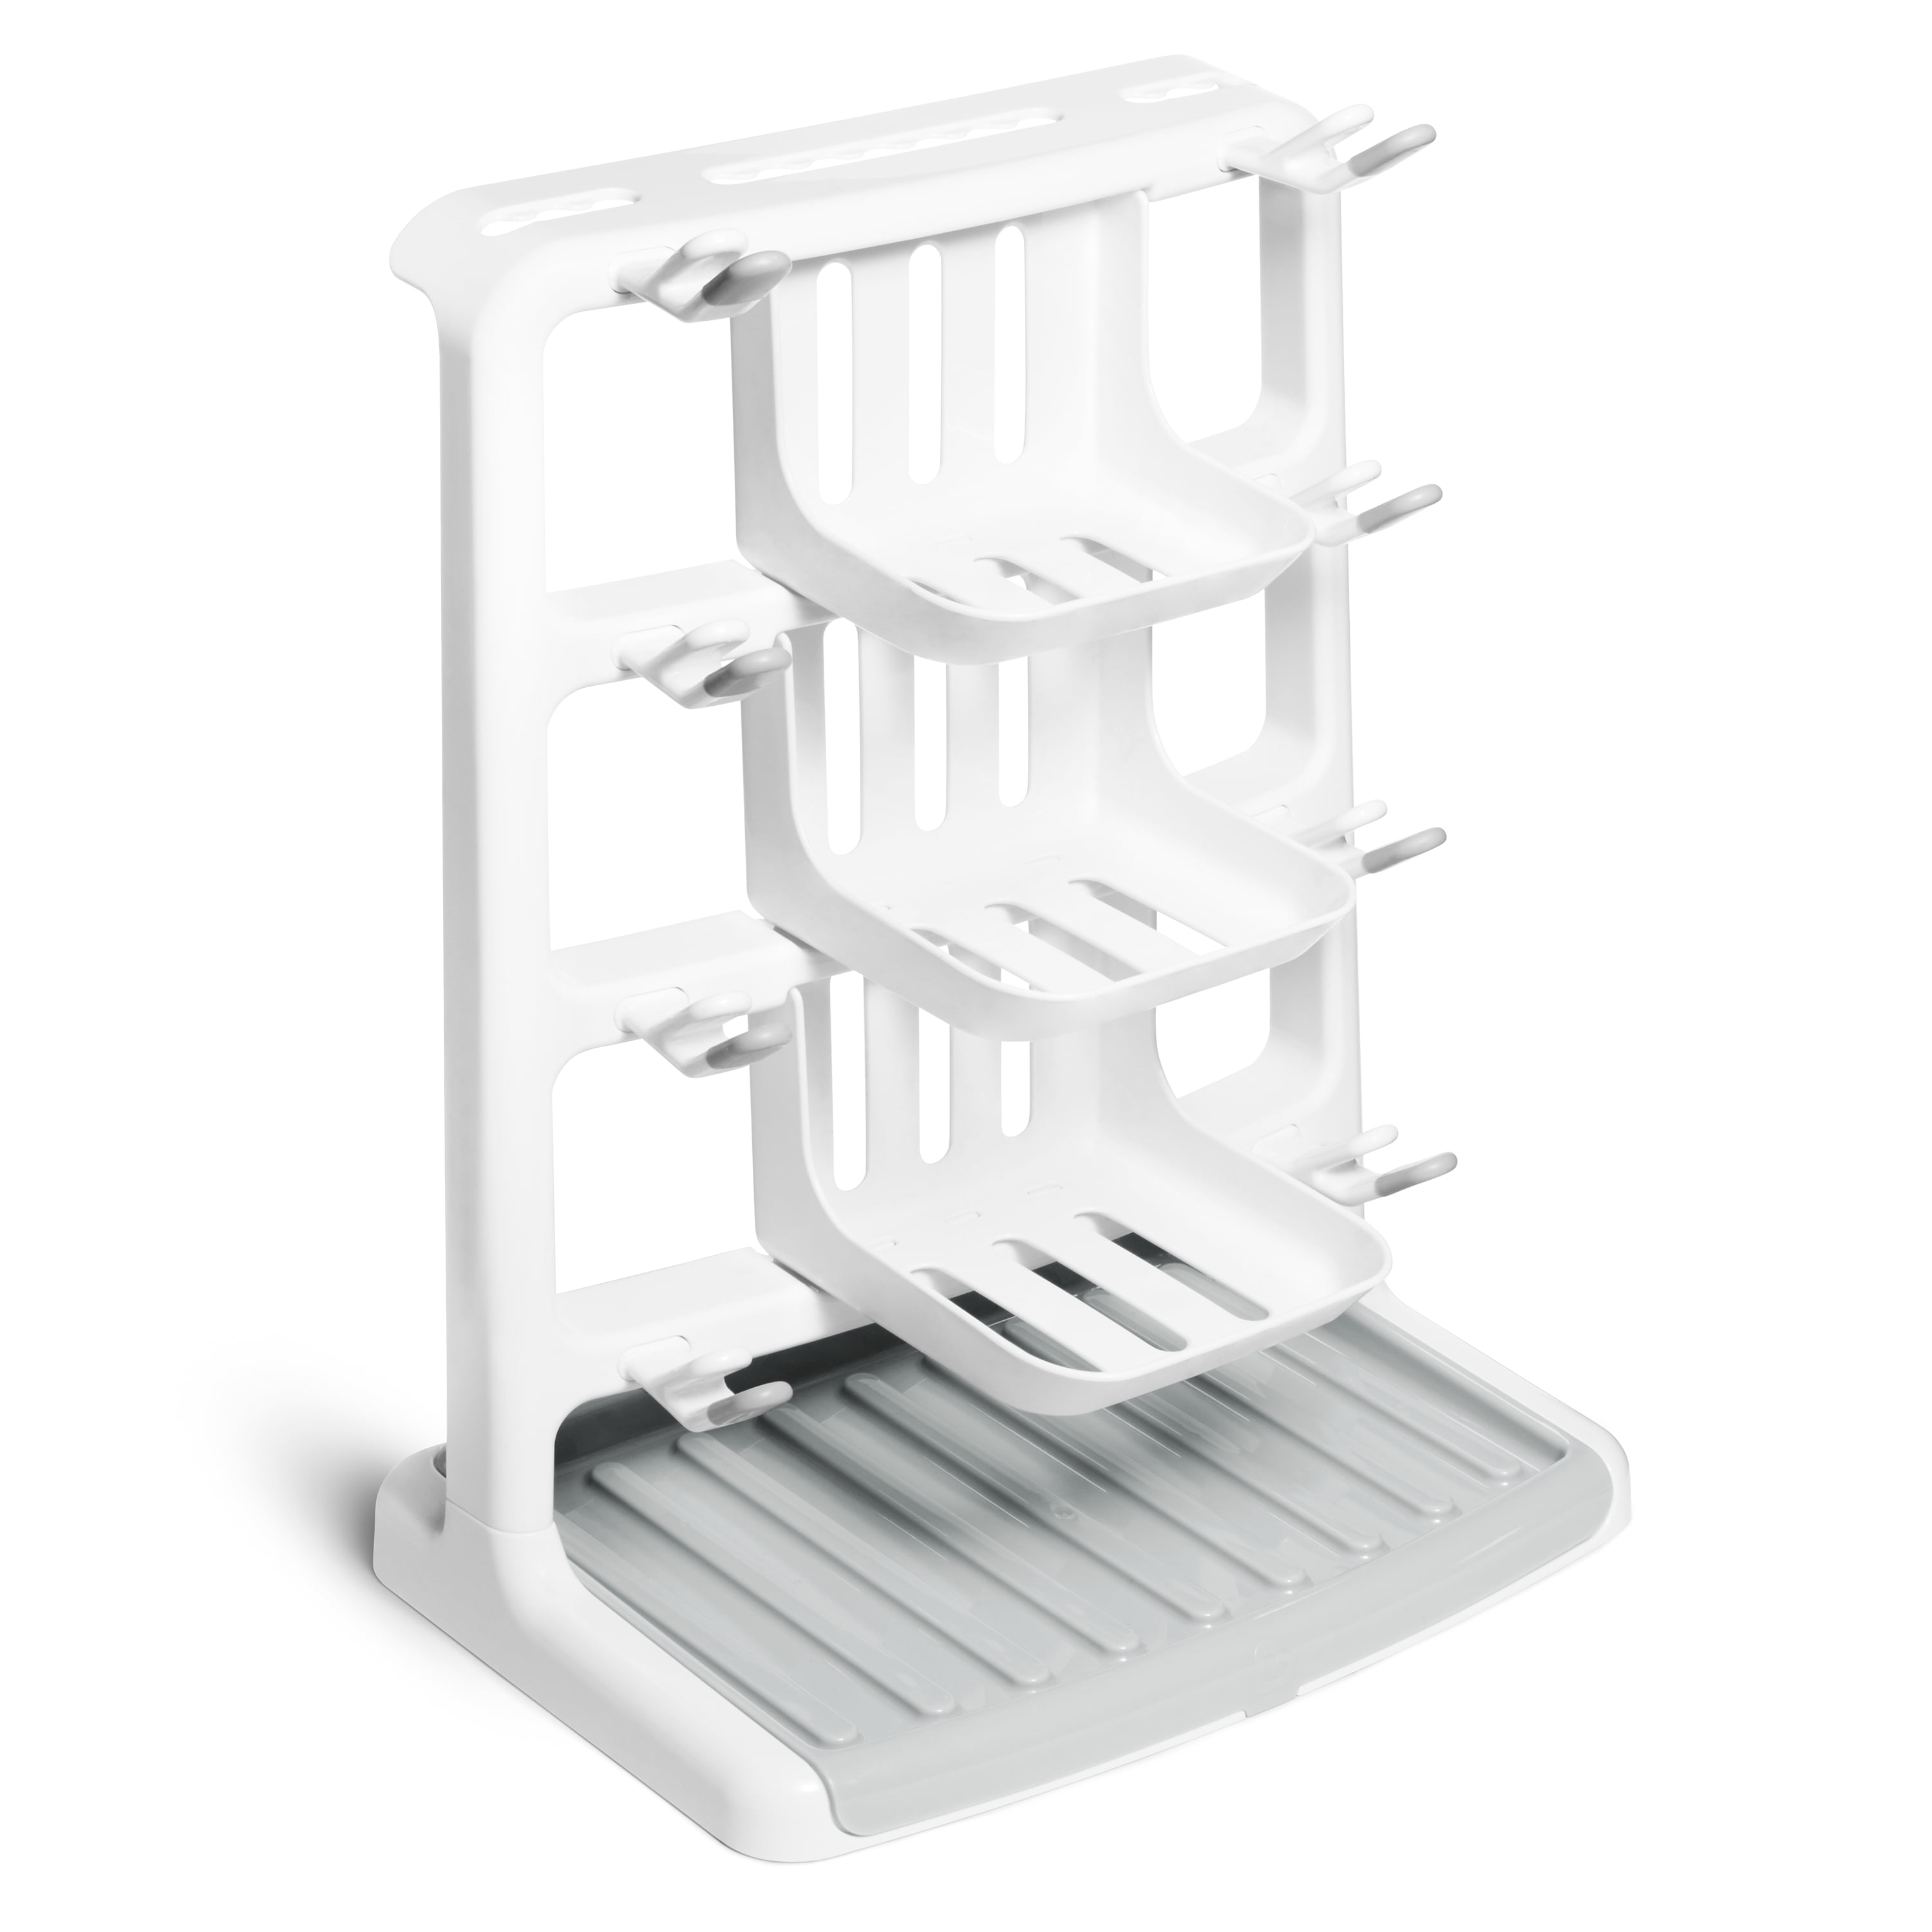 10 Space-Saving Drying Racks for Small Spaces